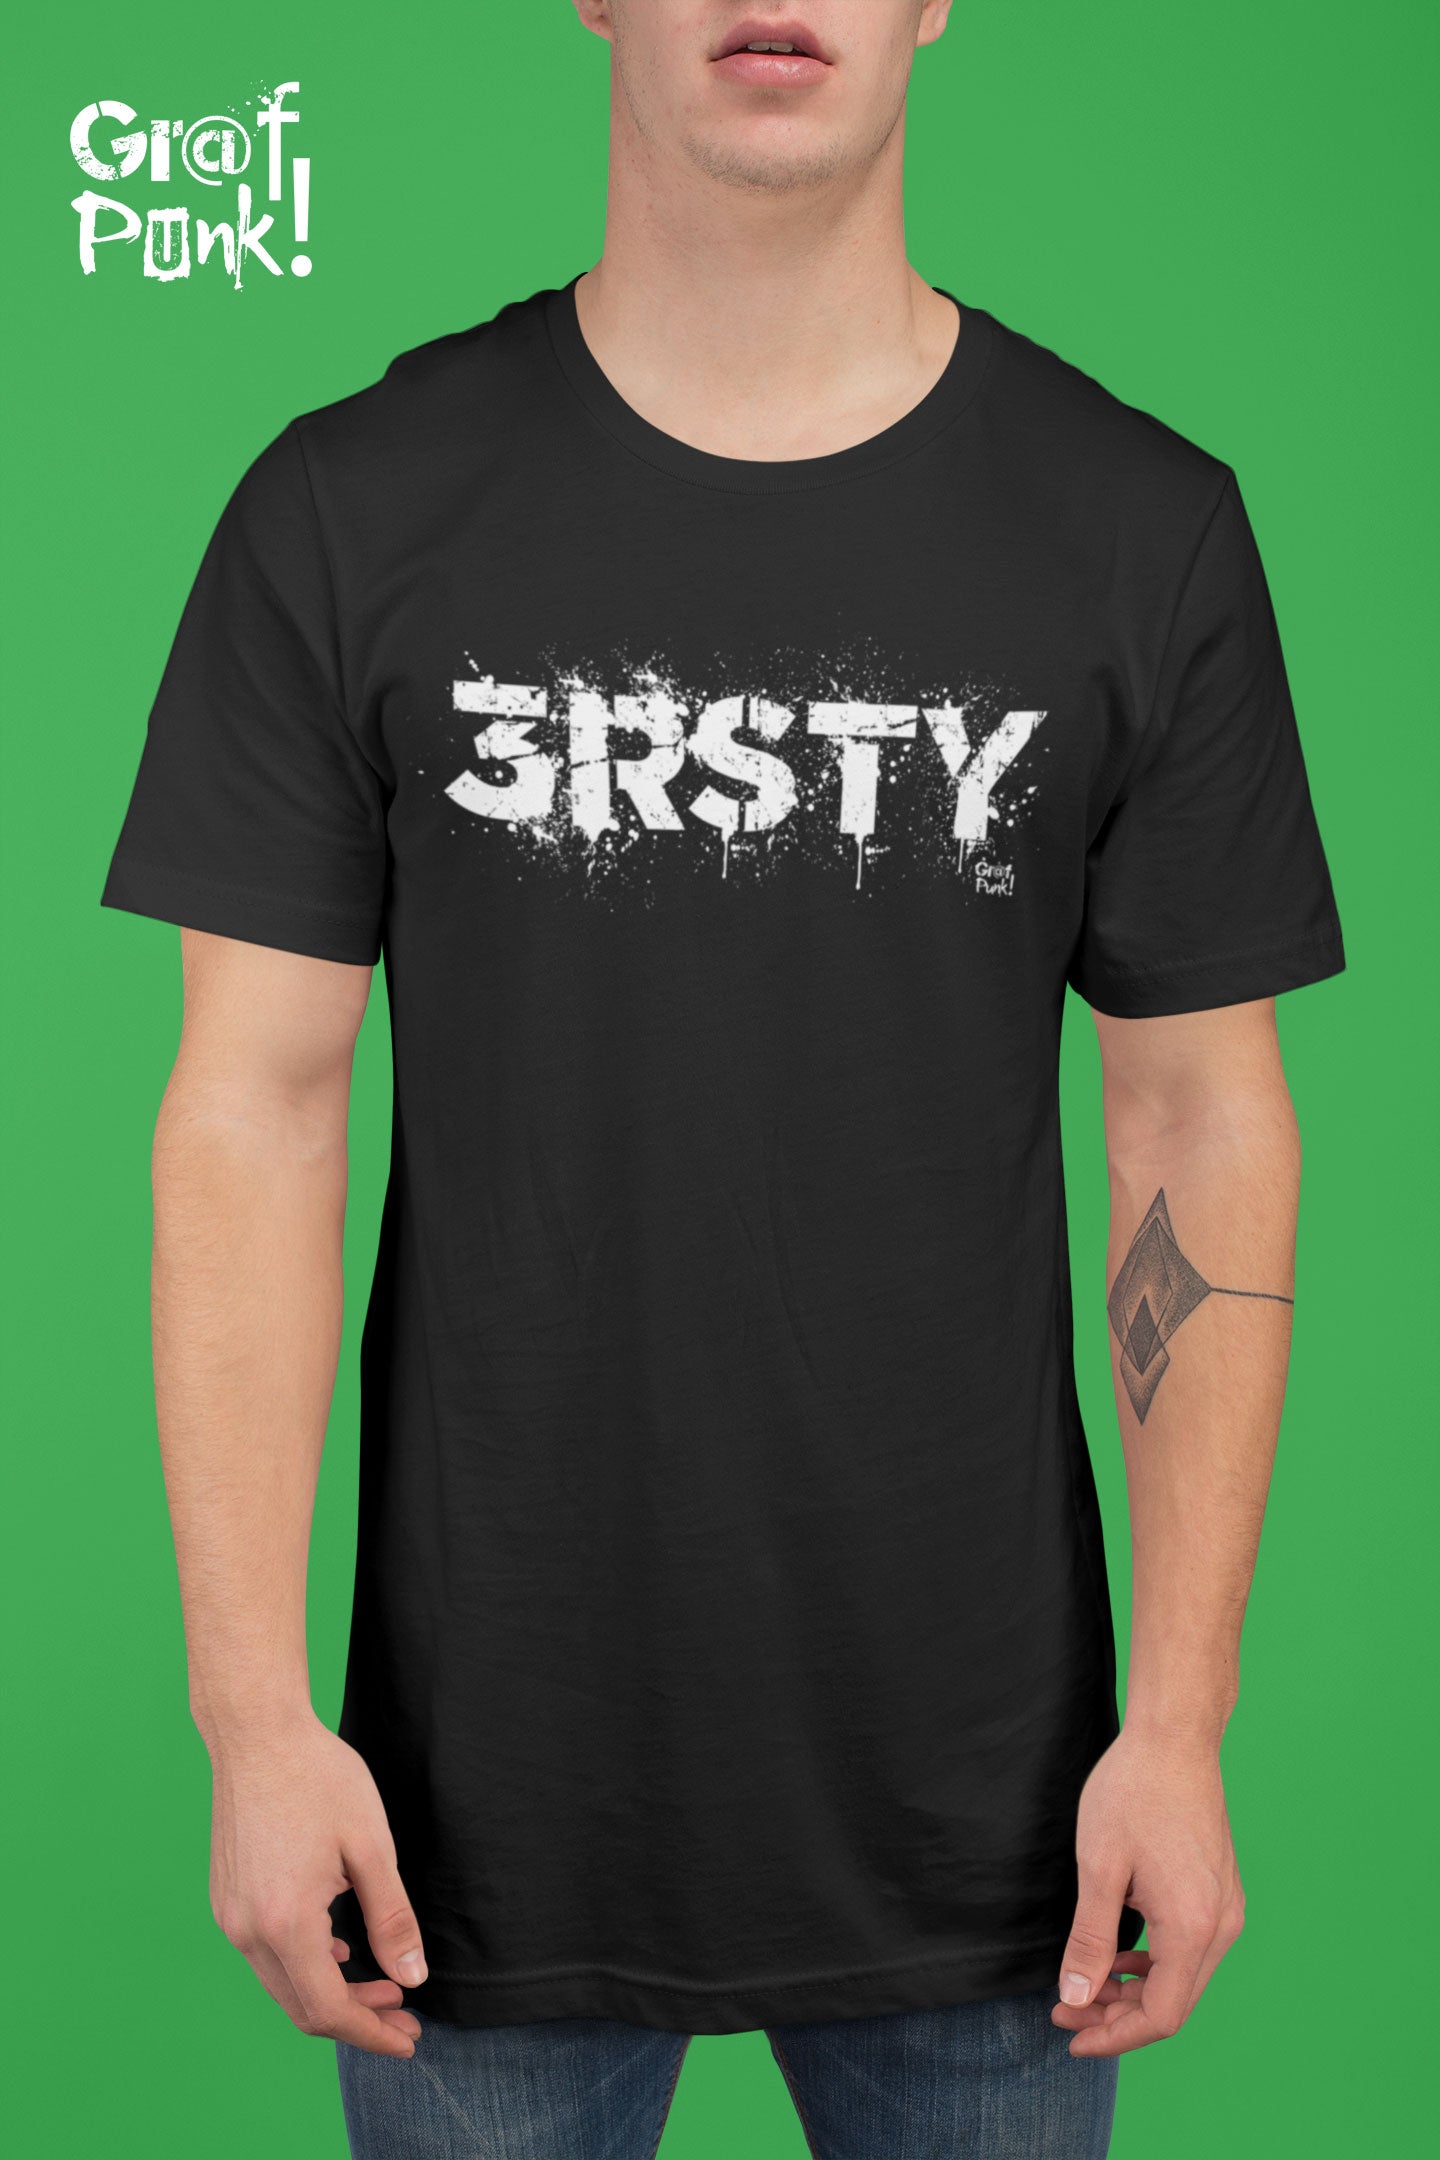 3RSTY  - T Shirt by GrafPunk!